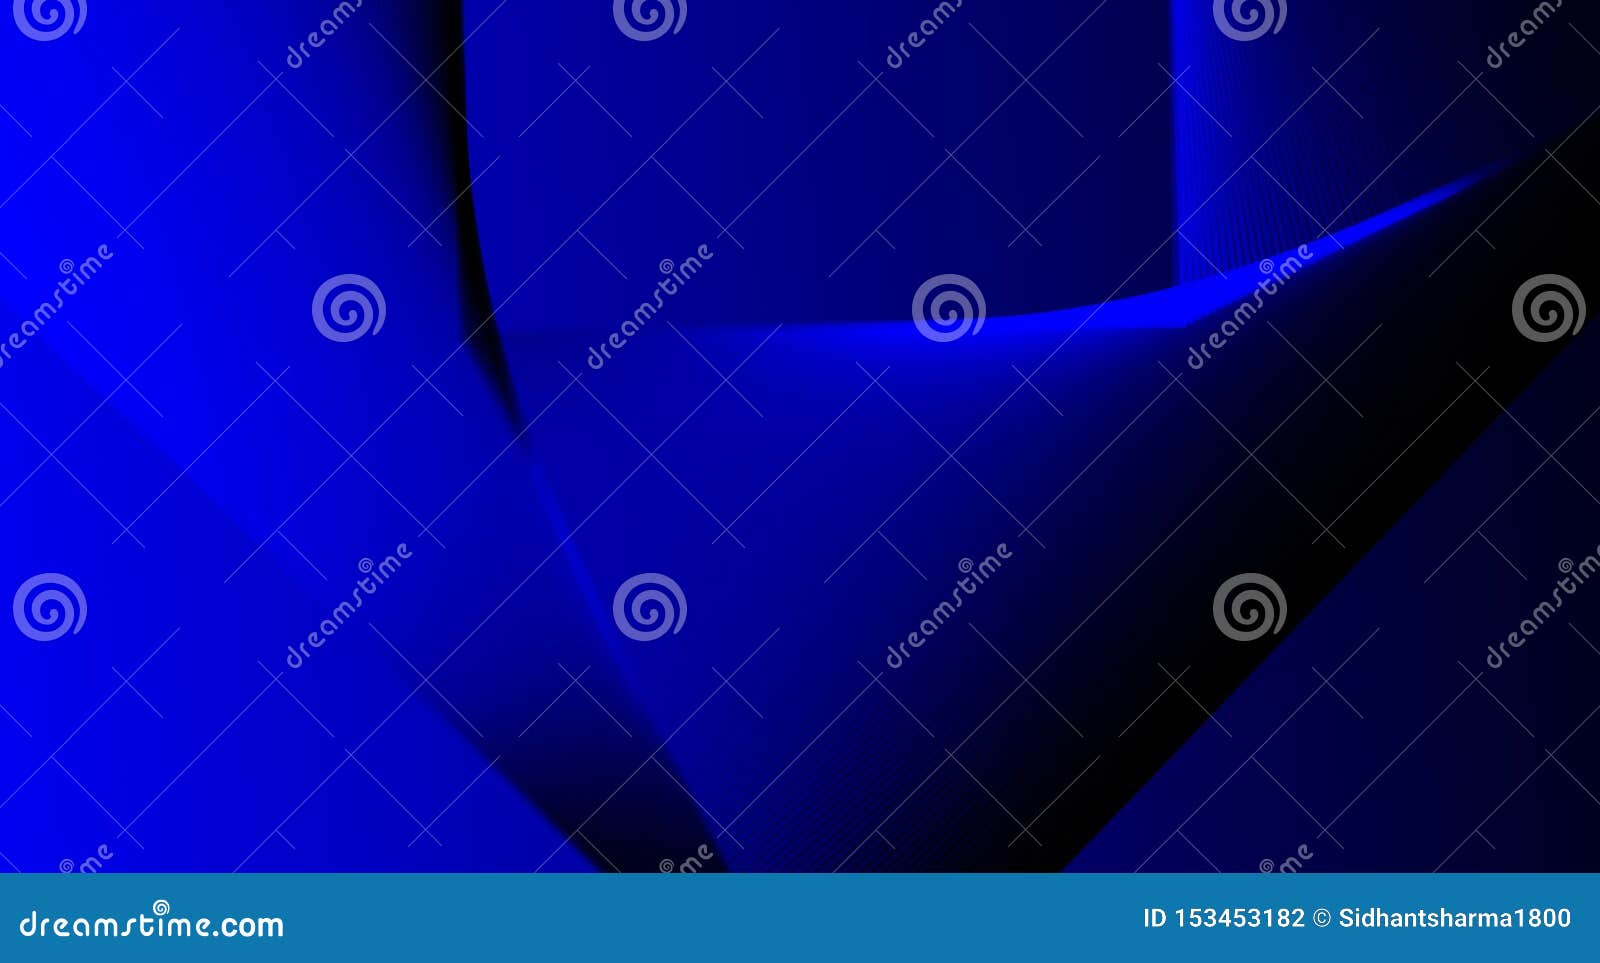 Abstract Black Deep Navy Blue Color Curved Shaped Blurred Background  Wallpaper. Stock Photo - Image of page, cards: 153453182